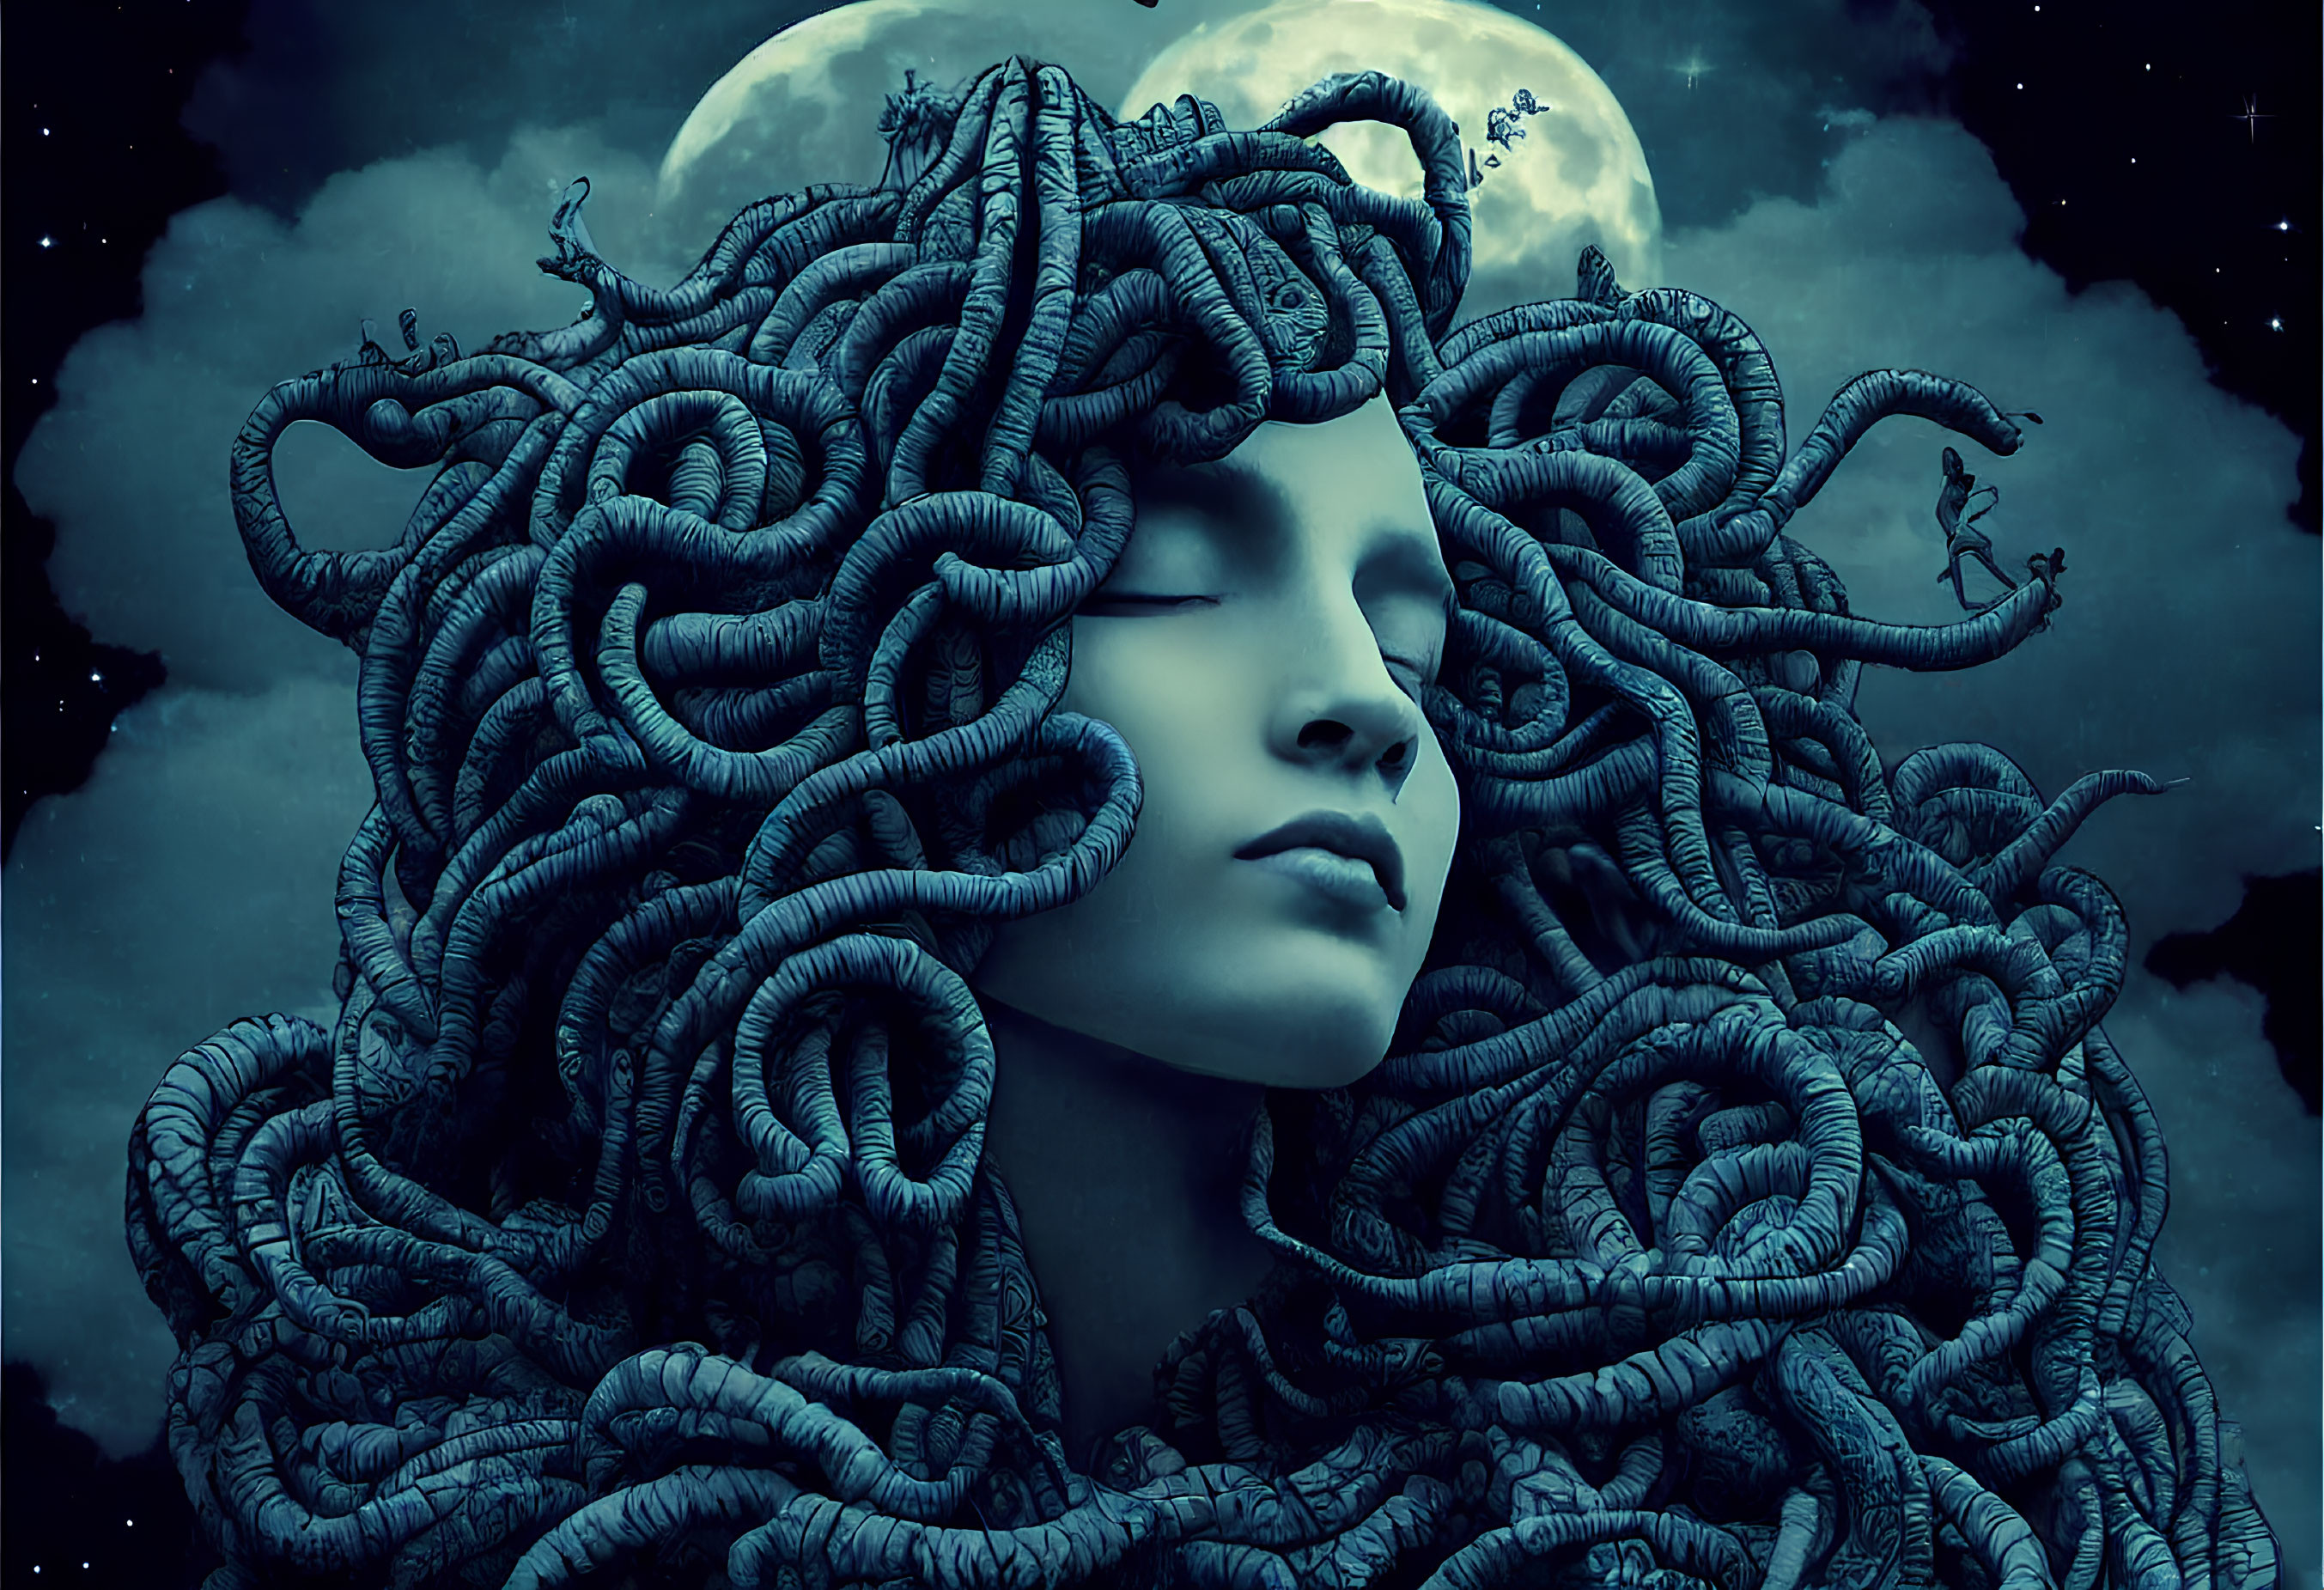 Surreal illustration of person with serpentine hair under moonlit sky